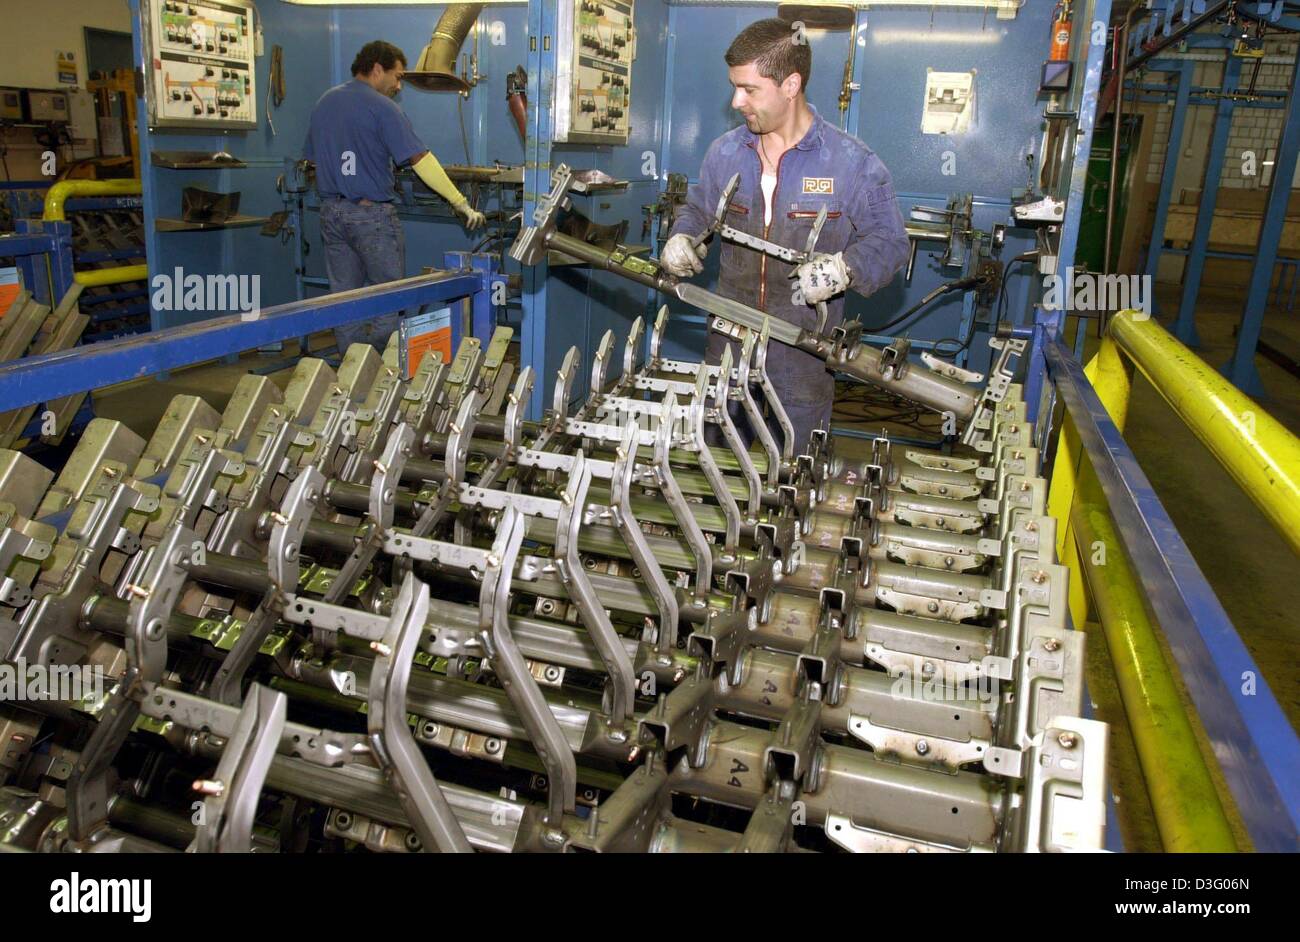 (dpa) - An employee of the car parts company 'Progress-Werk Oberkirch AG' (PWO) is checking parts for the Ford Fiesta dashboard, Oberkirch, Germany, 7 April 2003. PWO group increased its sales in 2002 by 9.2 percent to 175,2 million euros. Focussing on comfort and security car parts, PWO a sales growth for 2003, too, as car buyers are demanding these features. Stock Photo